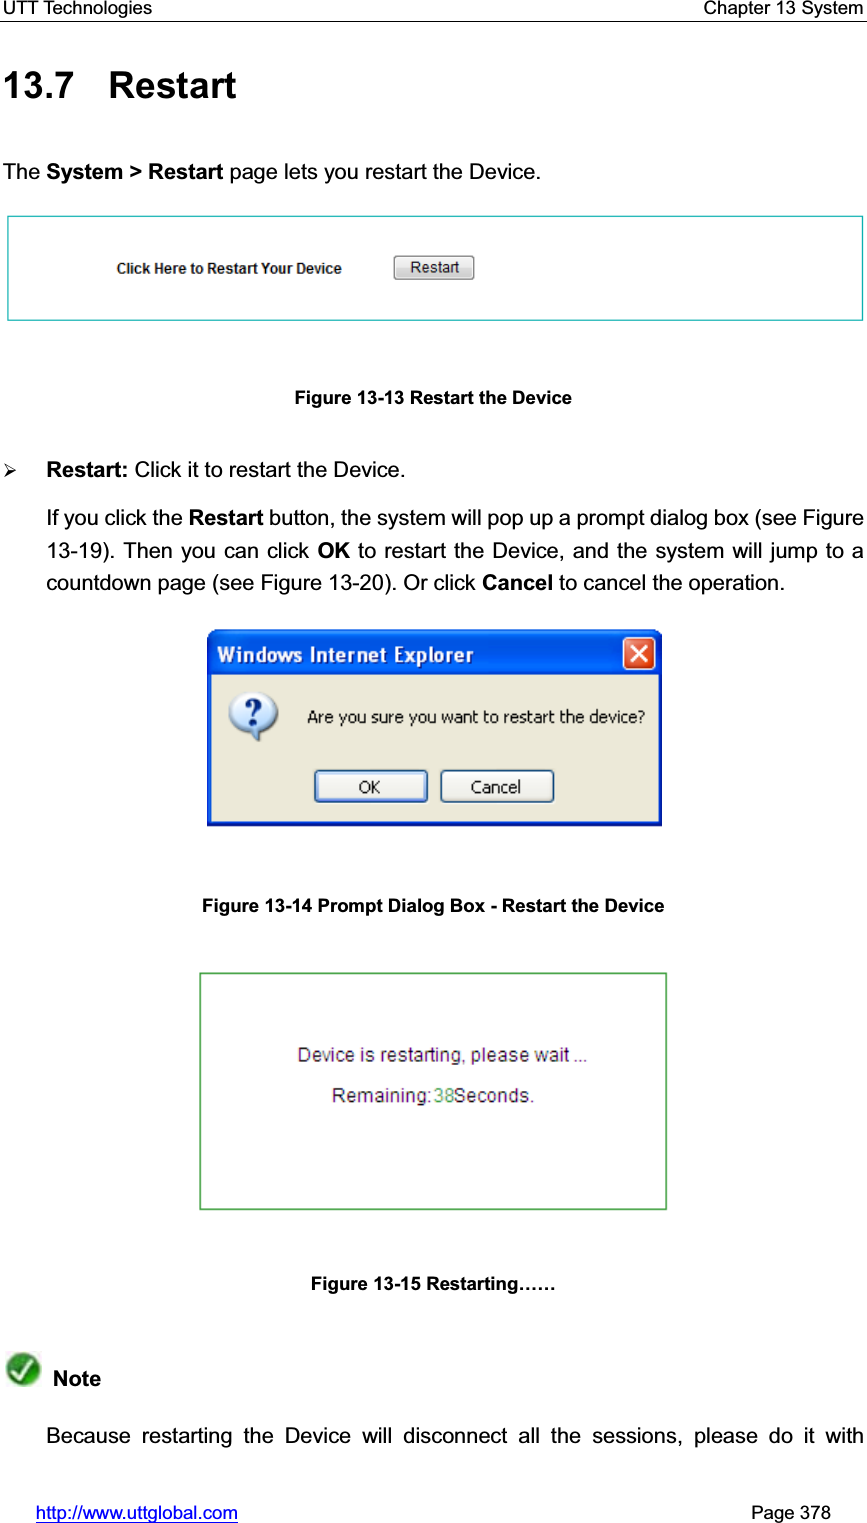 UTT Technologies    Chapter 13 System   http://www.uttglobal.com                                                       Page 378 13.7 Restart  The System &gt; Restart page lets you restart the Device.Figure 13-13 Restart the Device ¾Restart: Click it to restart the Device. If you click the Restart button, the system will pop up a prompt dialog box (see Figure 13-19). Then you can click OK to restart the Device, and the system will jump to a countdown page (see Figure 13-20). Or click Cancel to cancel the operation.Figure 13-14 Prompt Dialog Box - Restart the Device Figure 13-15 Restarting««NoteBecause restarting the Device will disconnect all the sessions, please do it with 